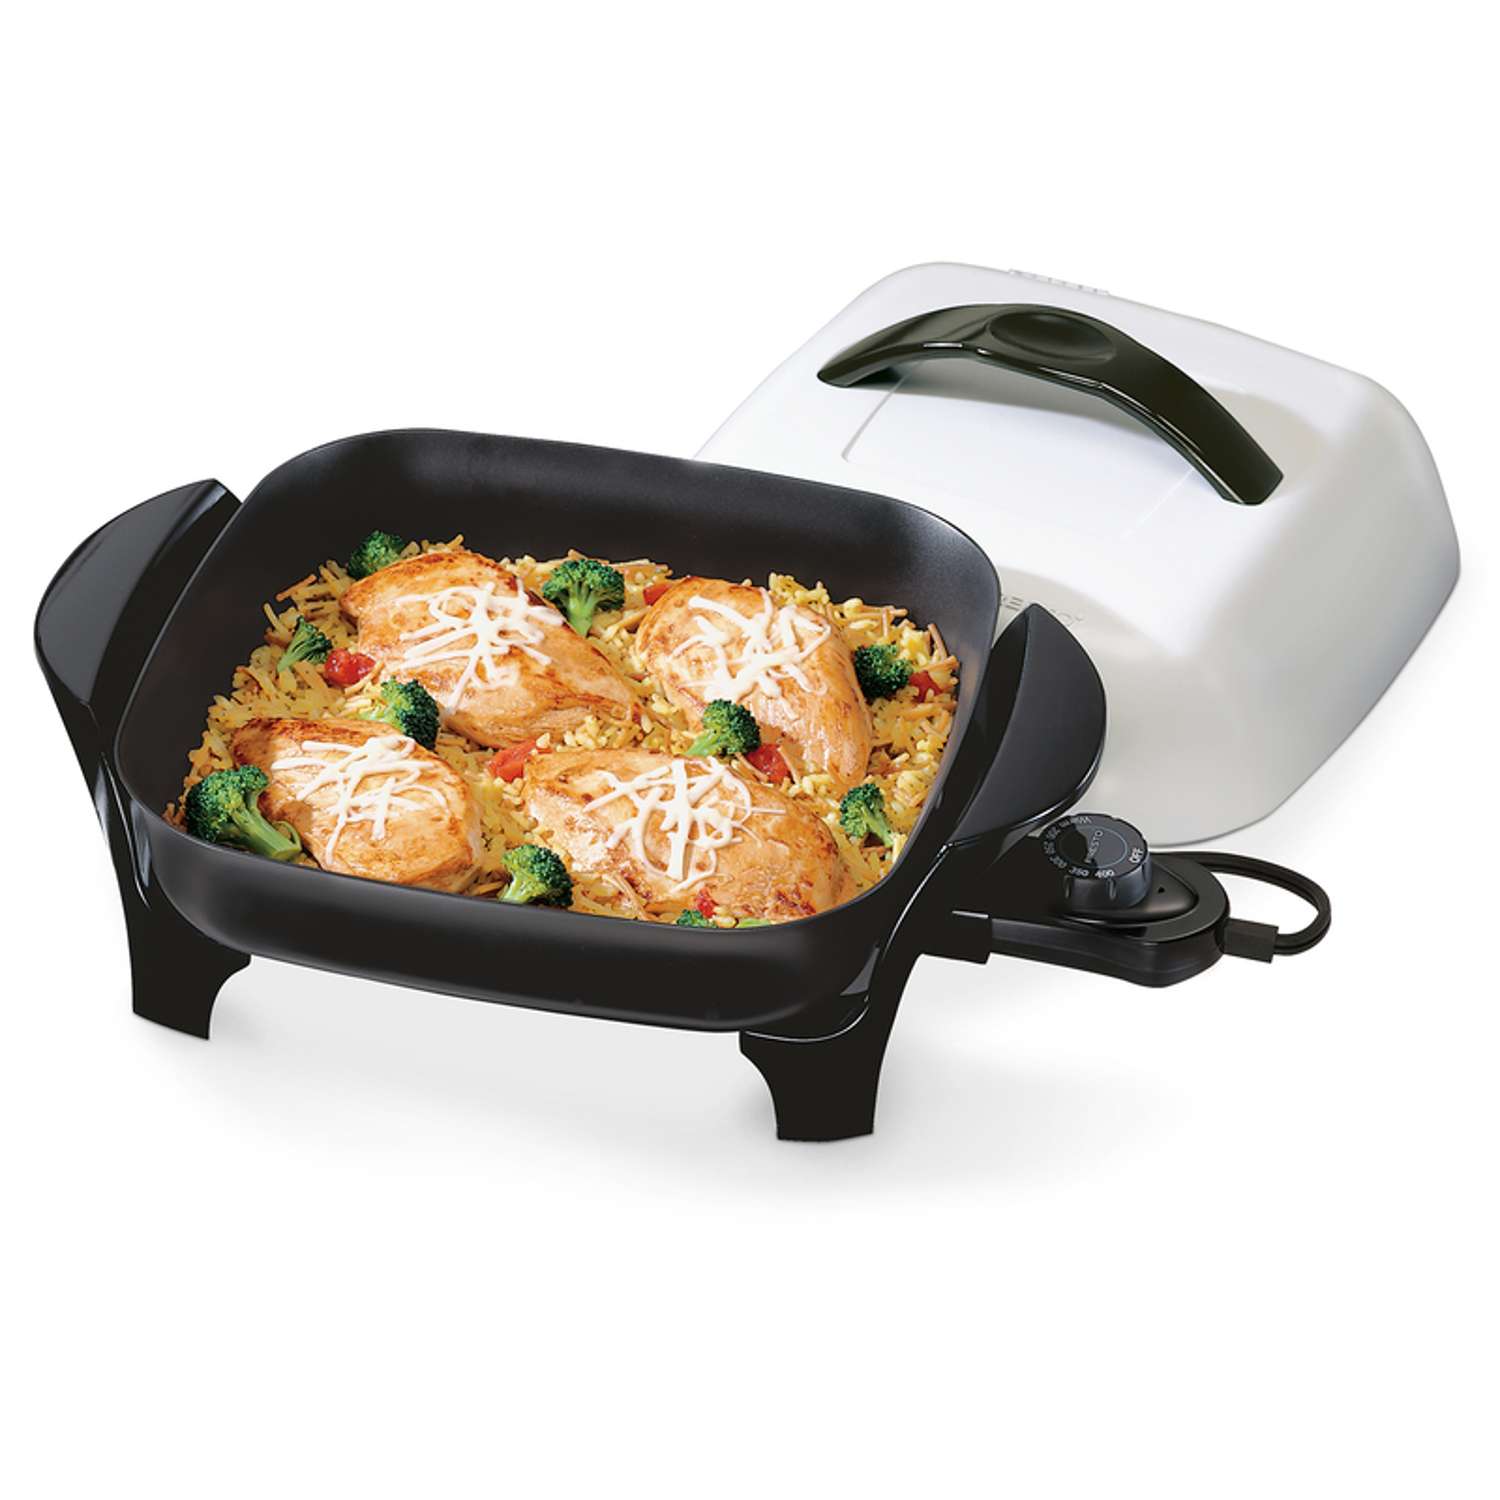 Presto 16 inch Electric Skillet with Glass Cover and power cord